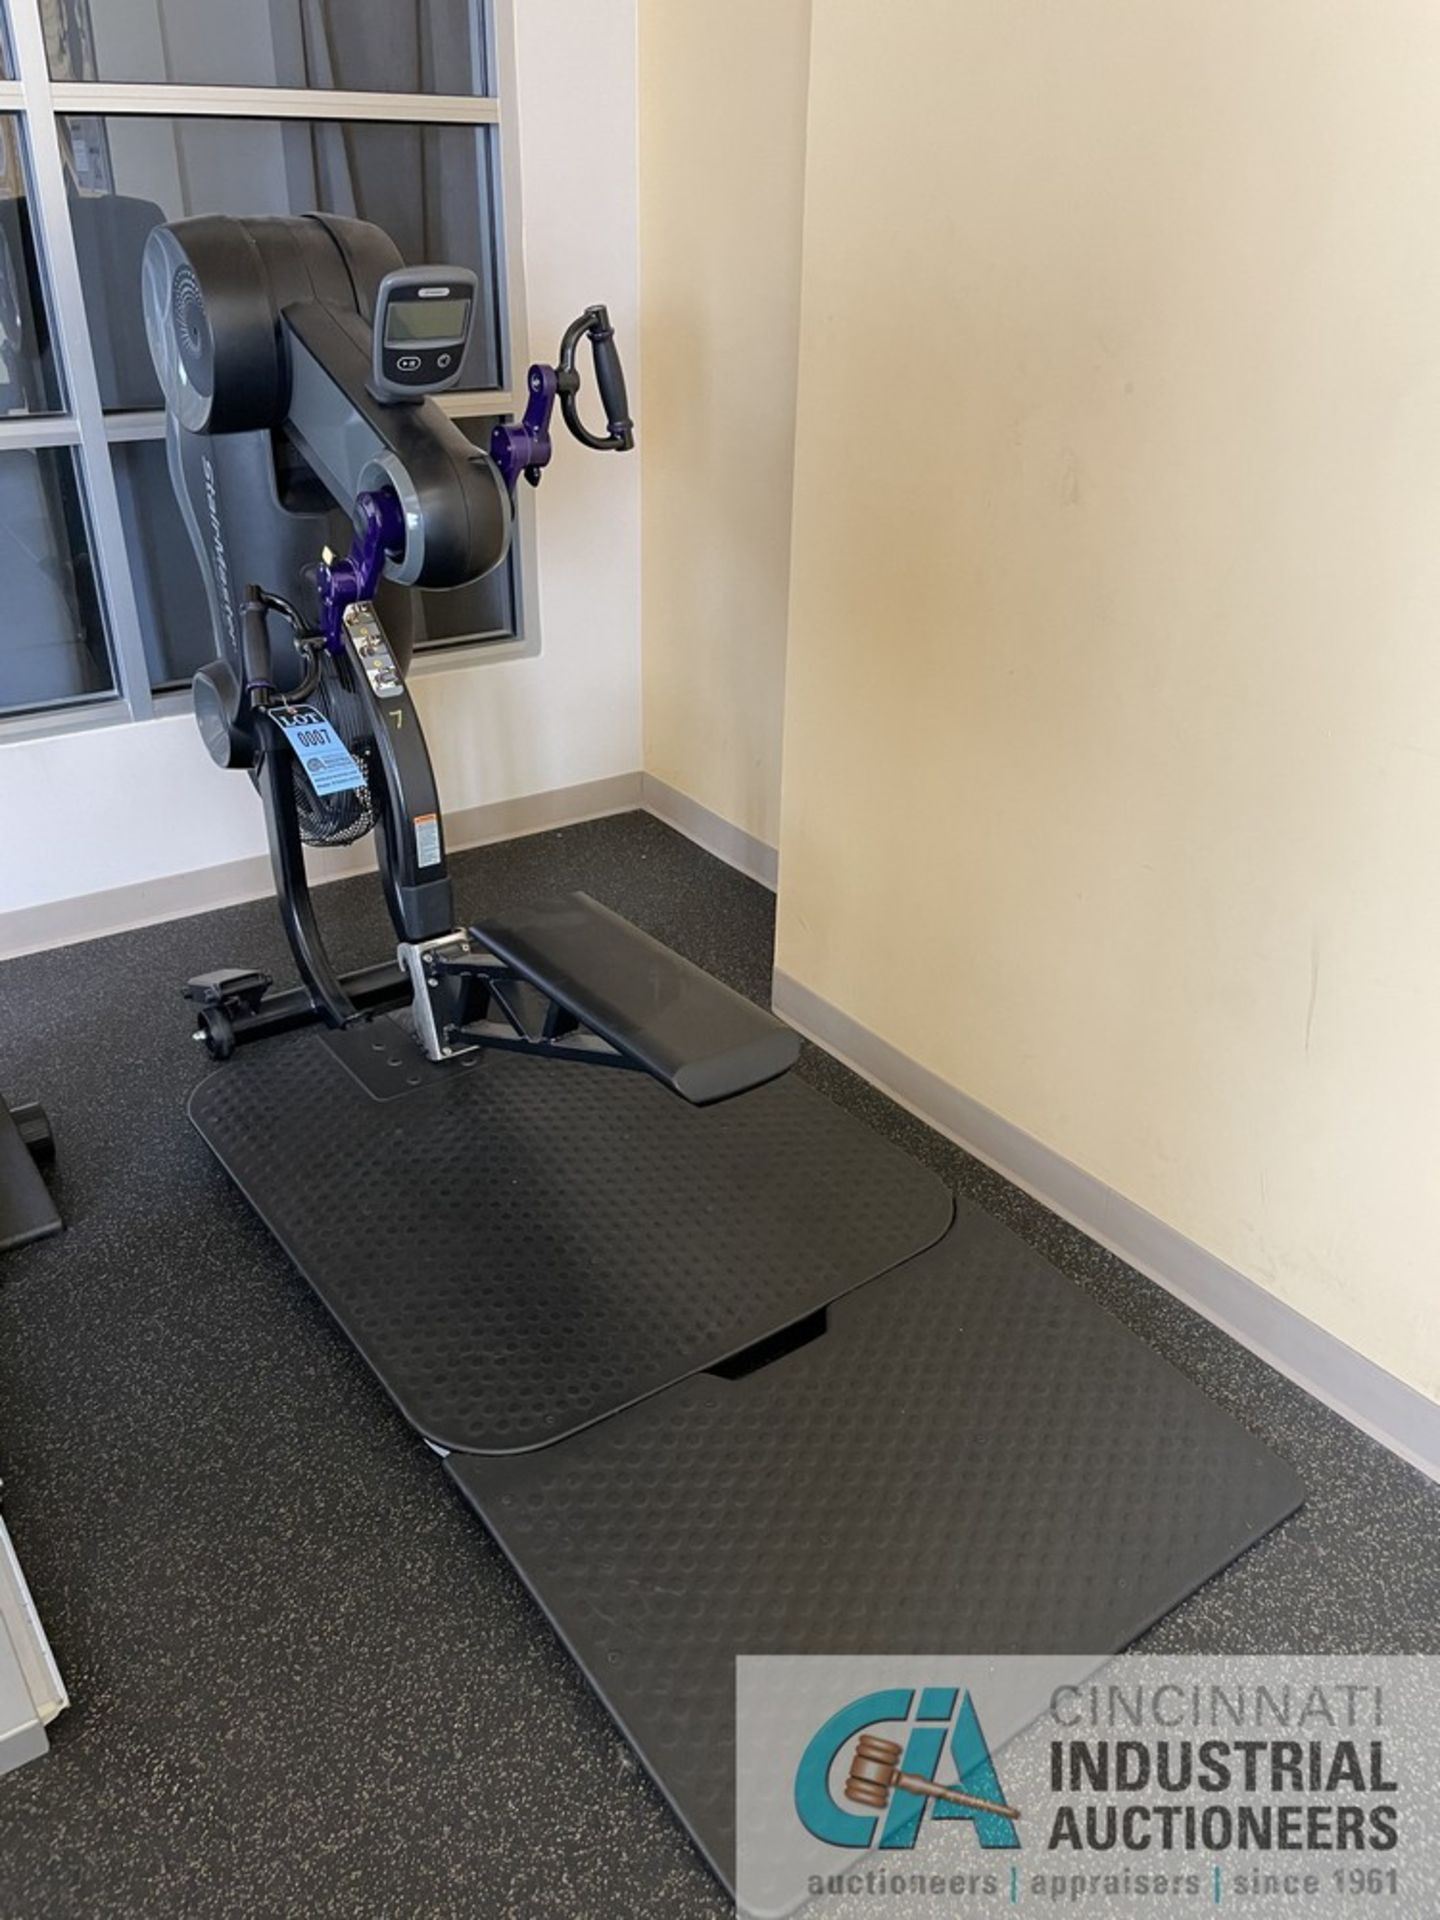 STAIR MASTER AIRFIT UB HAND BIKE **ATTN: This lot is located on the second floor. Removal will be by